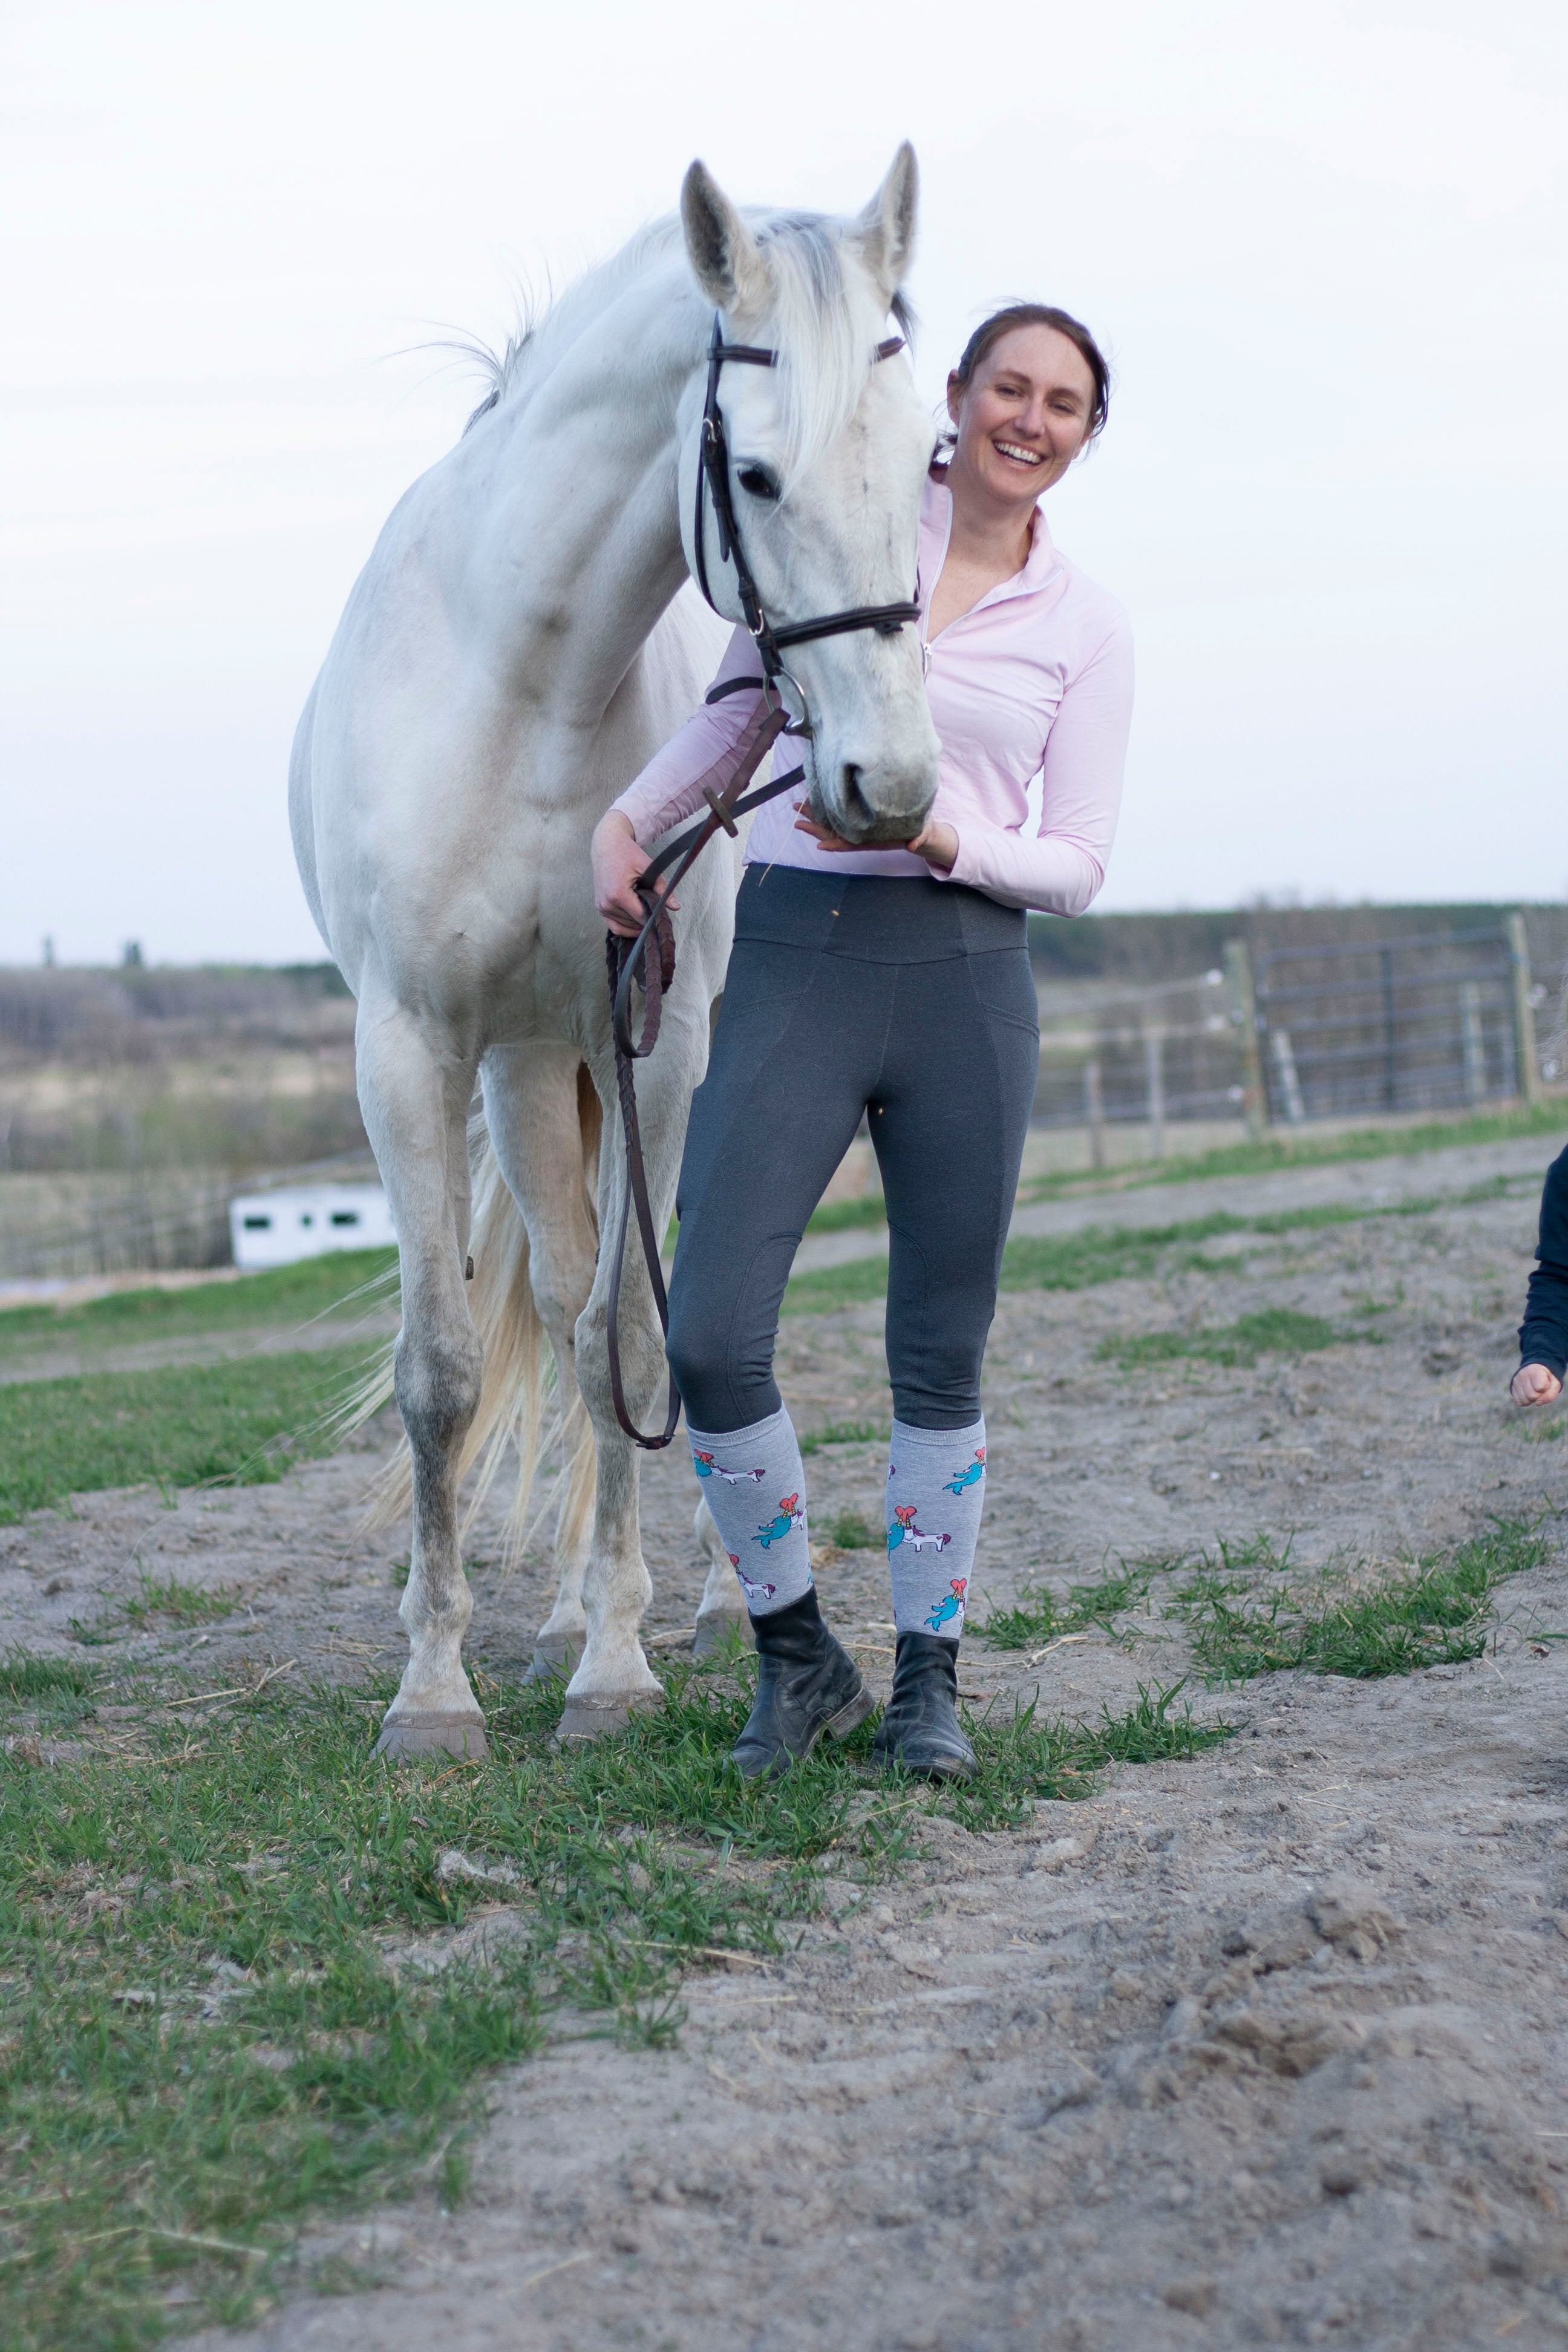 Bundle - Cavallo and Novello Leggings for Youth and Adult